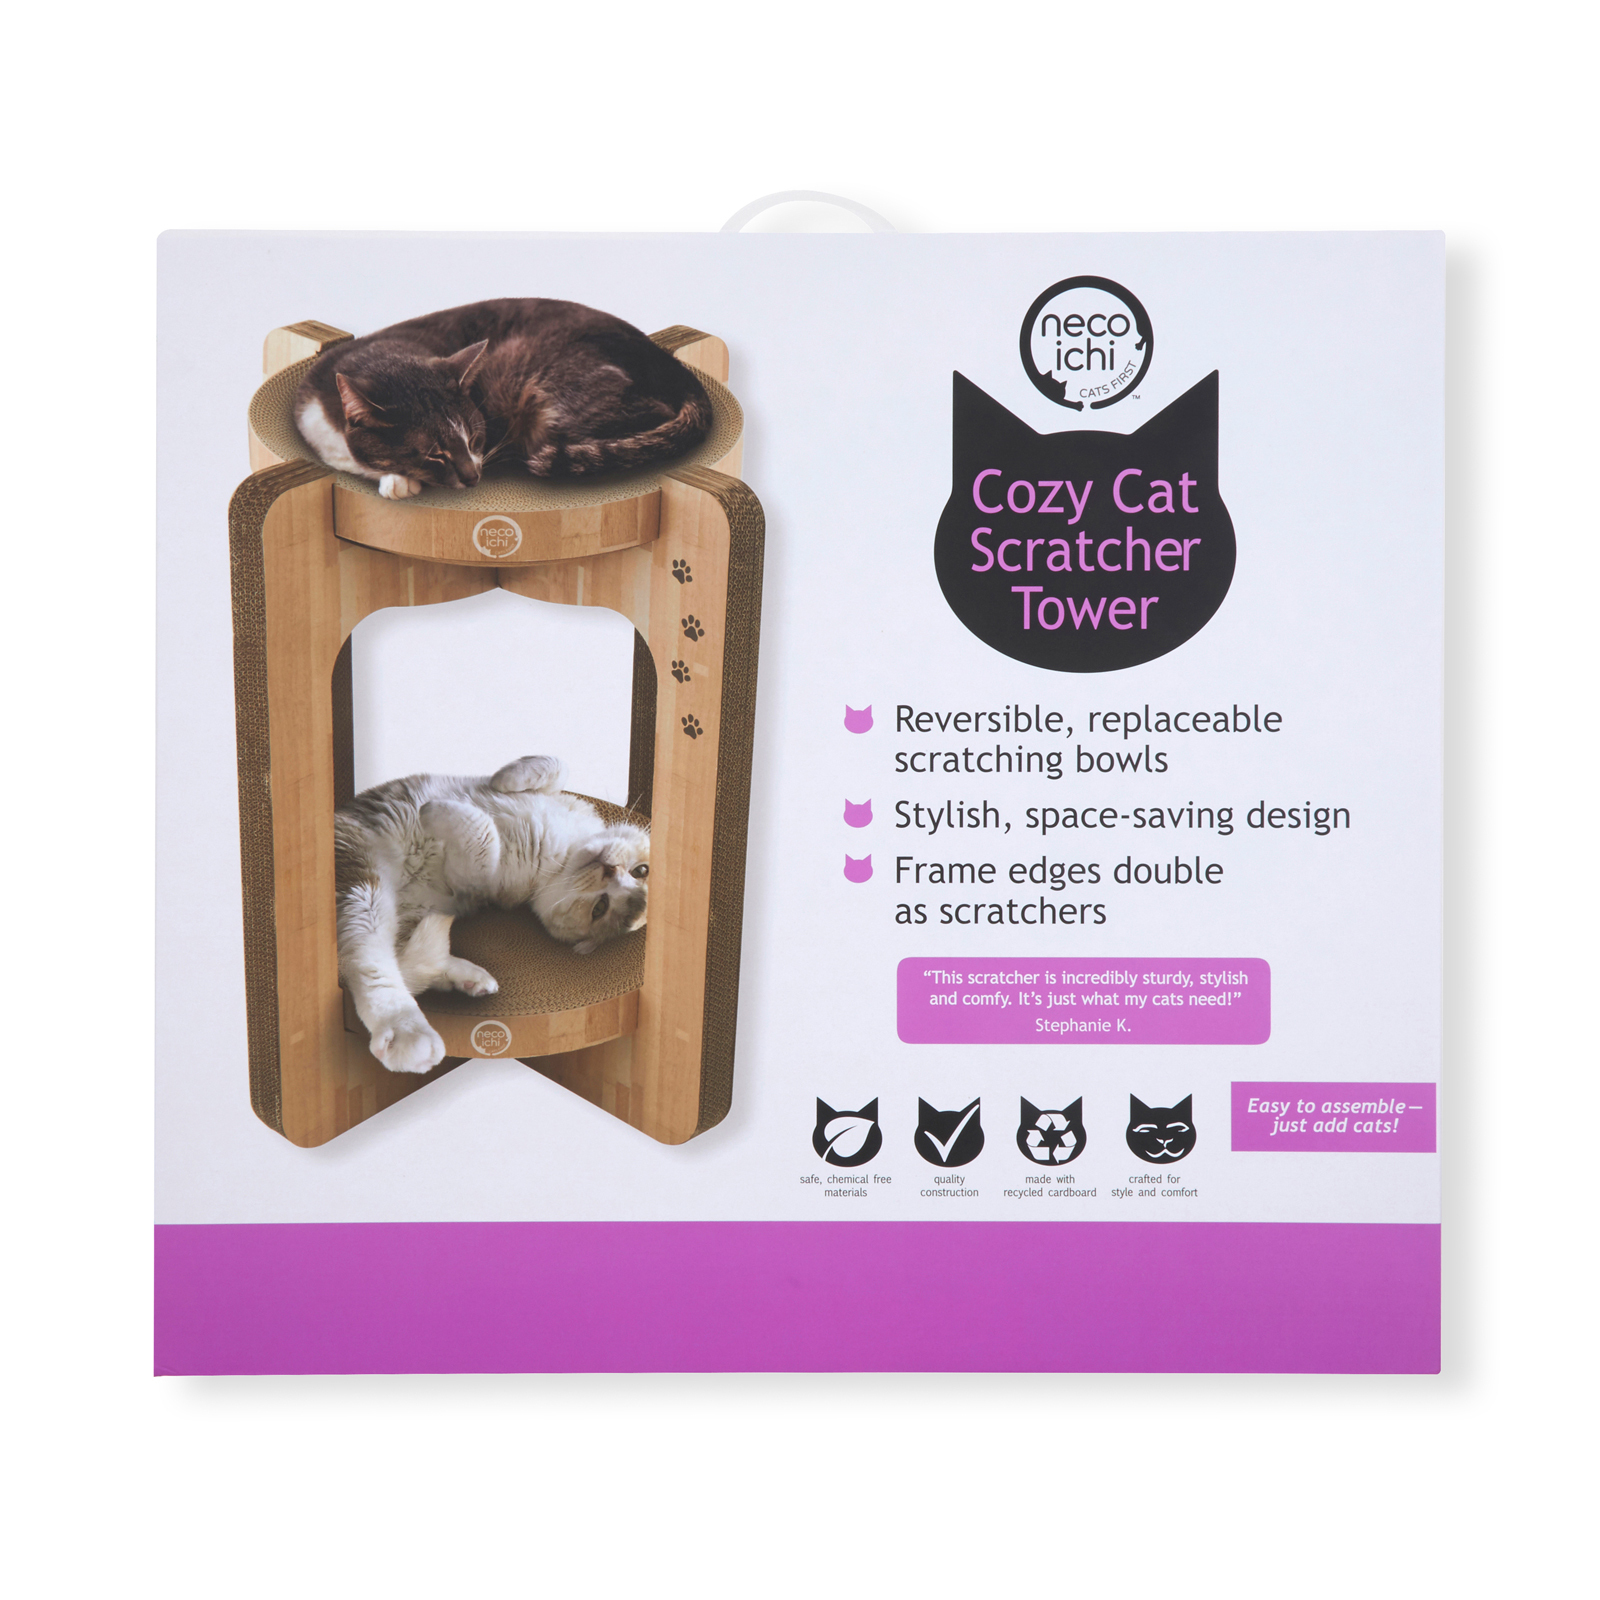 Cozy Cat Scratcher Tower　 package